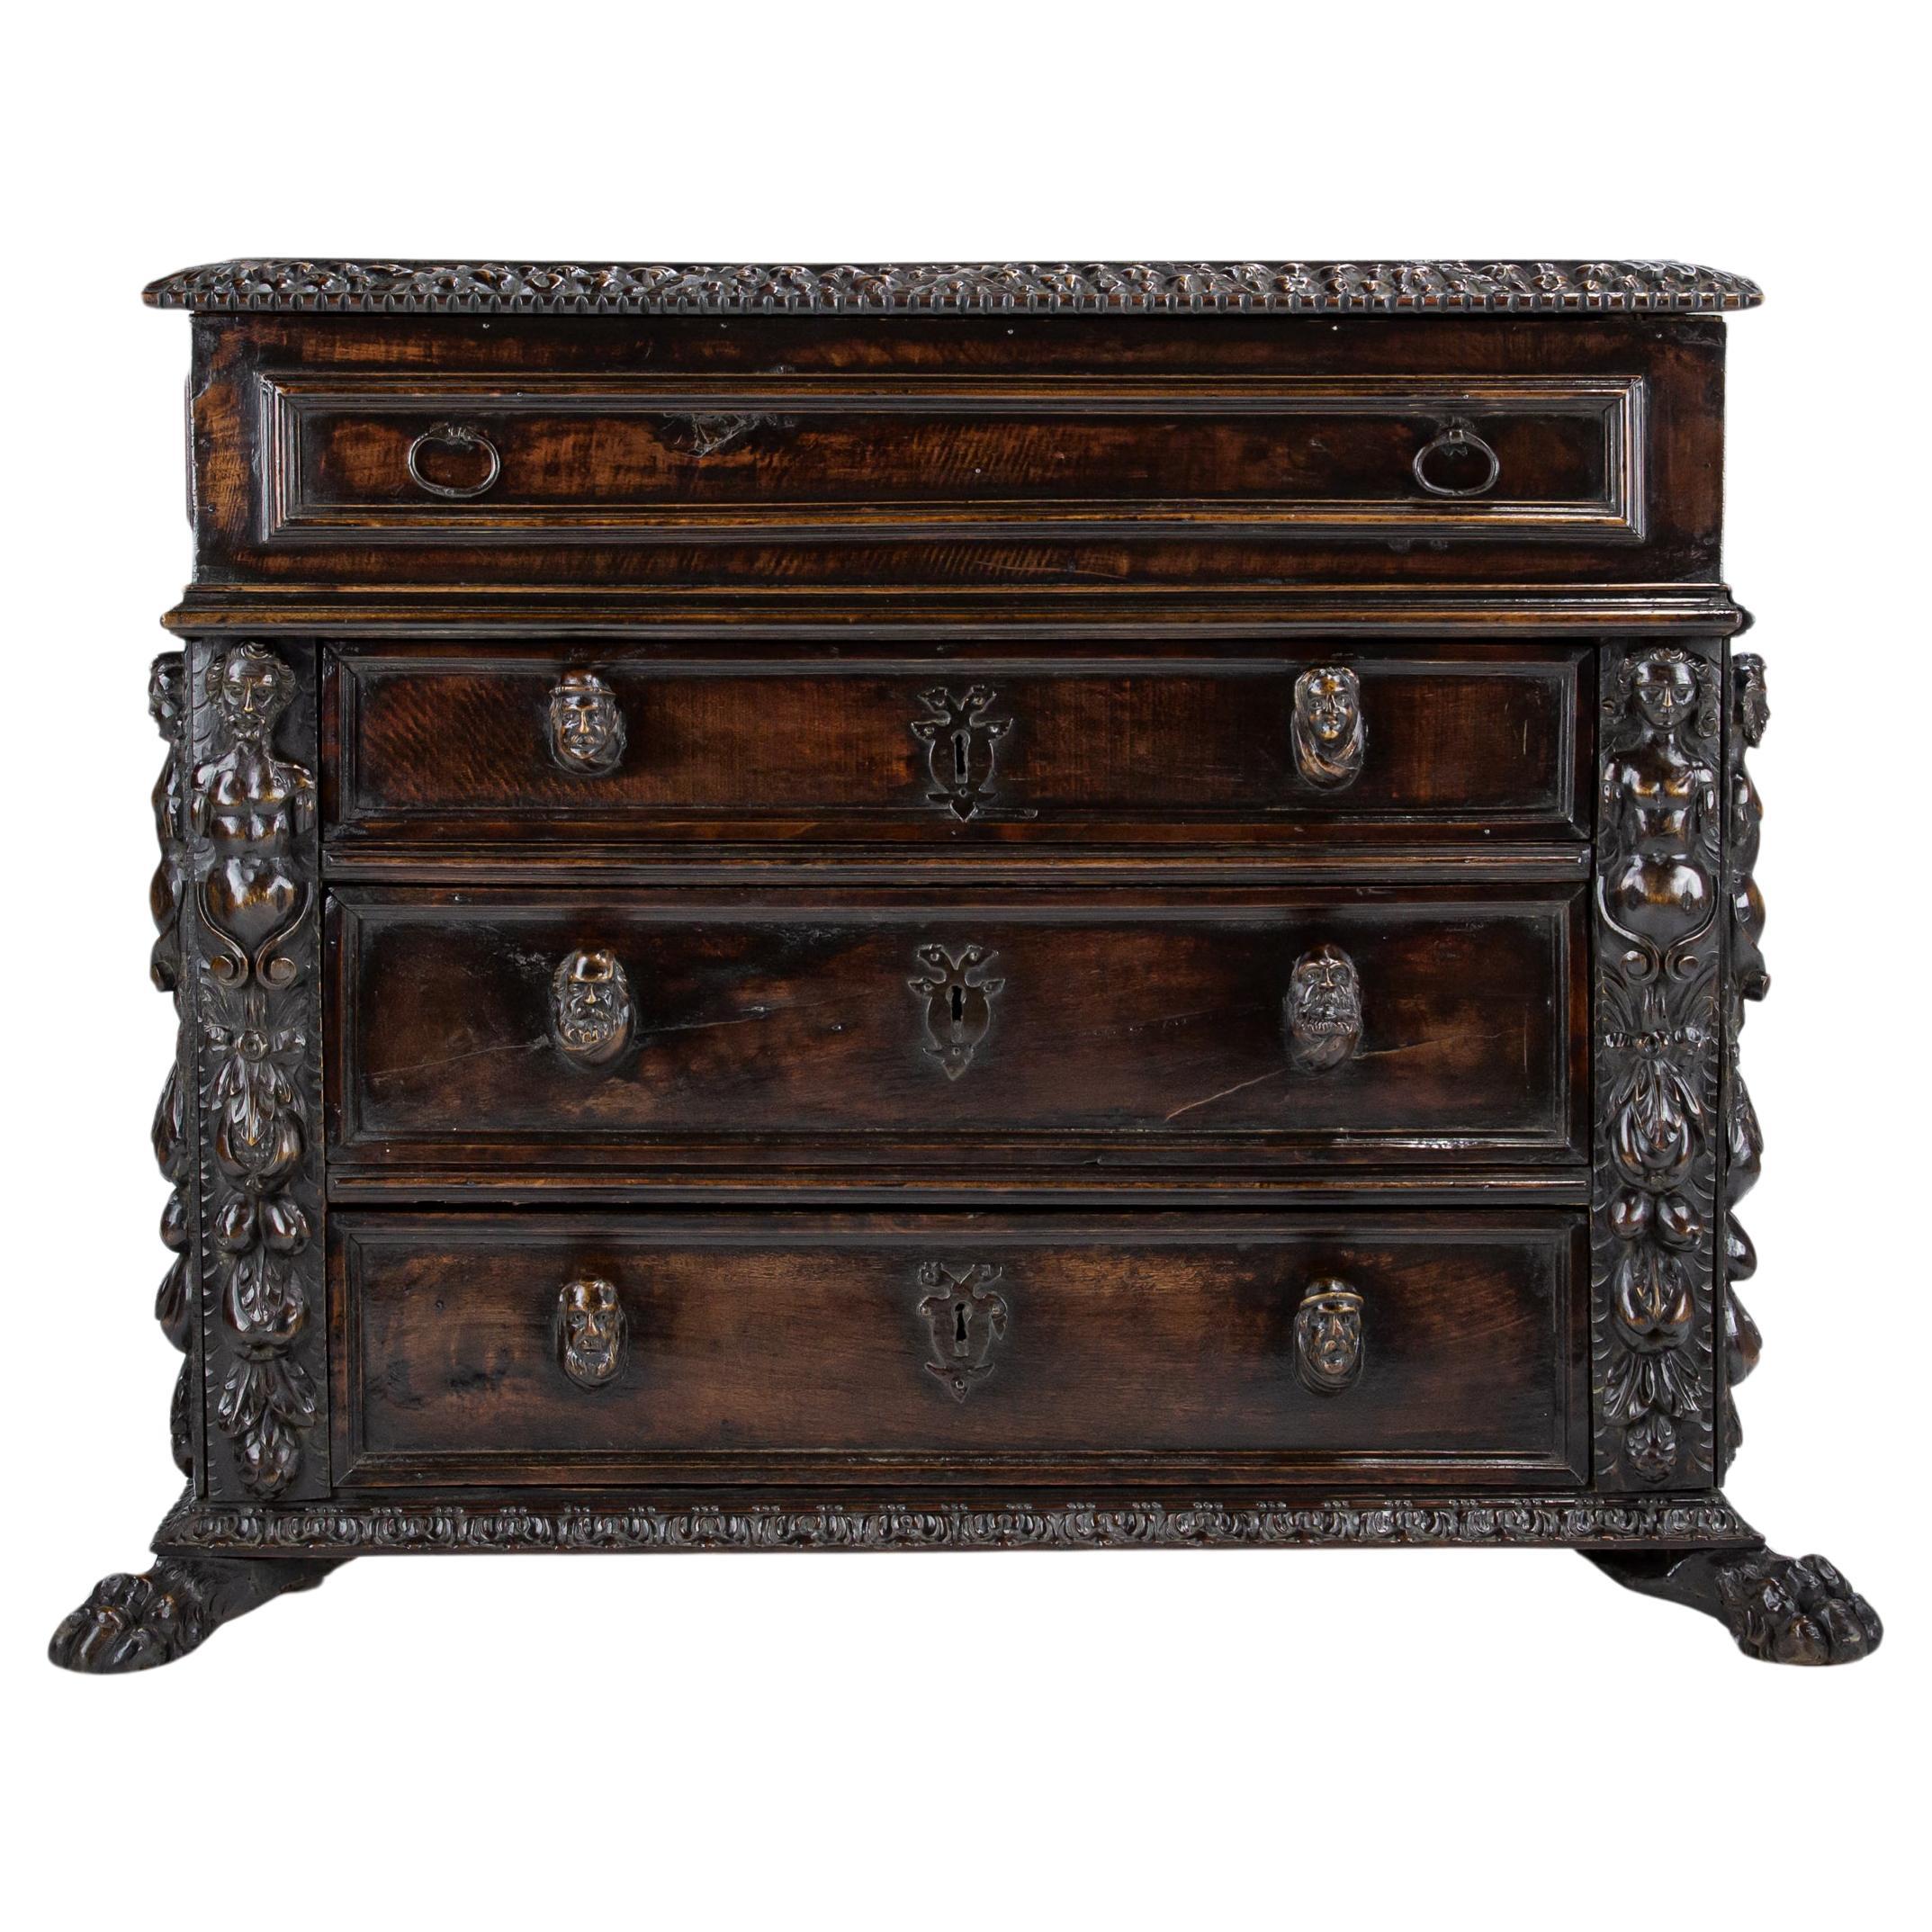 Late 17th or Early 18th Century Walnut Bambocci Commode For Sale